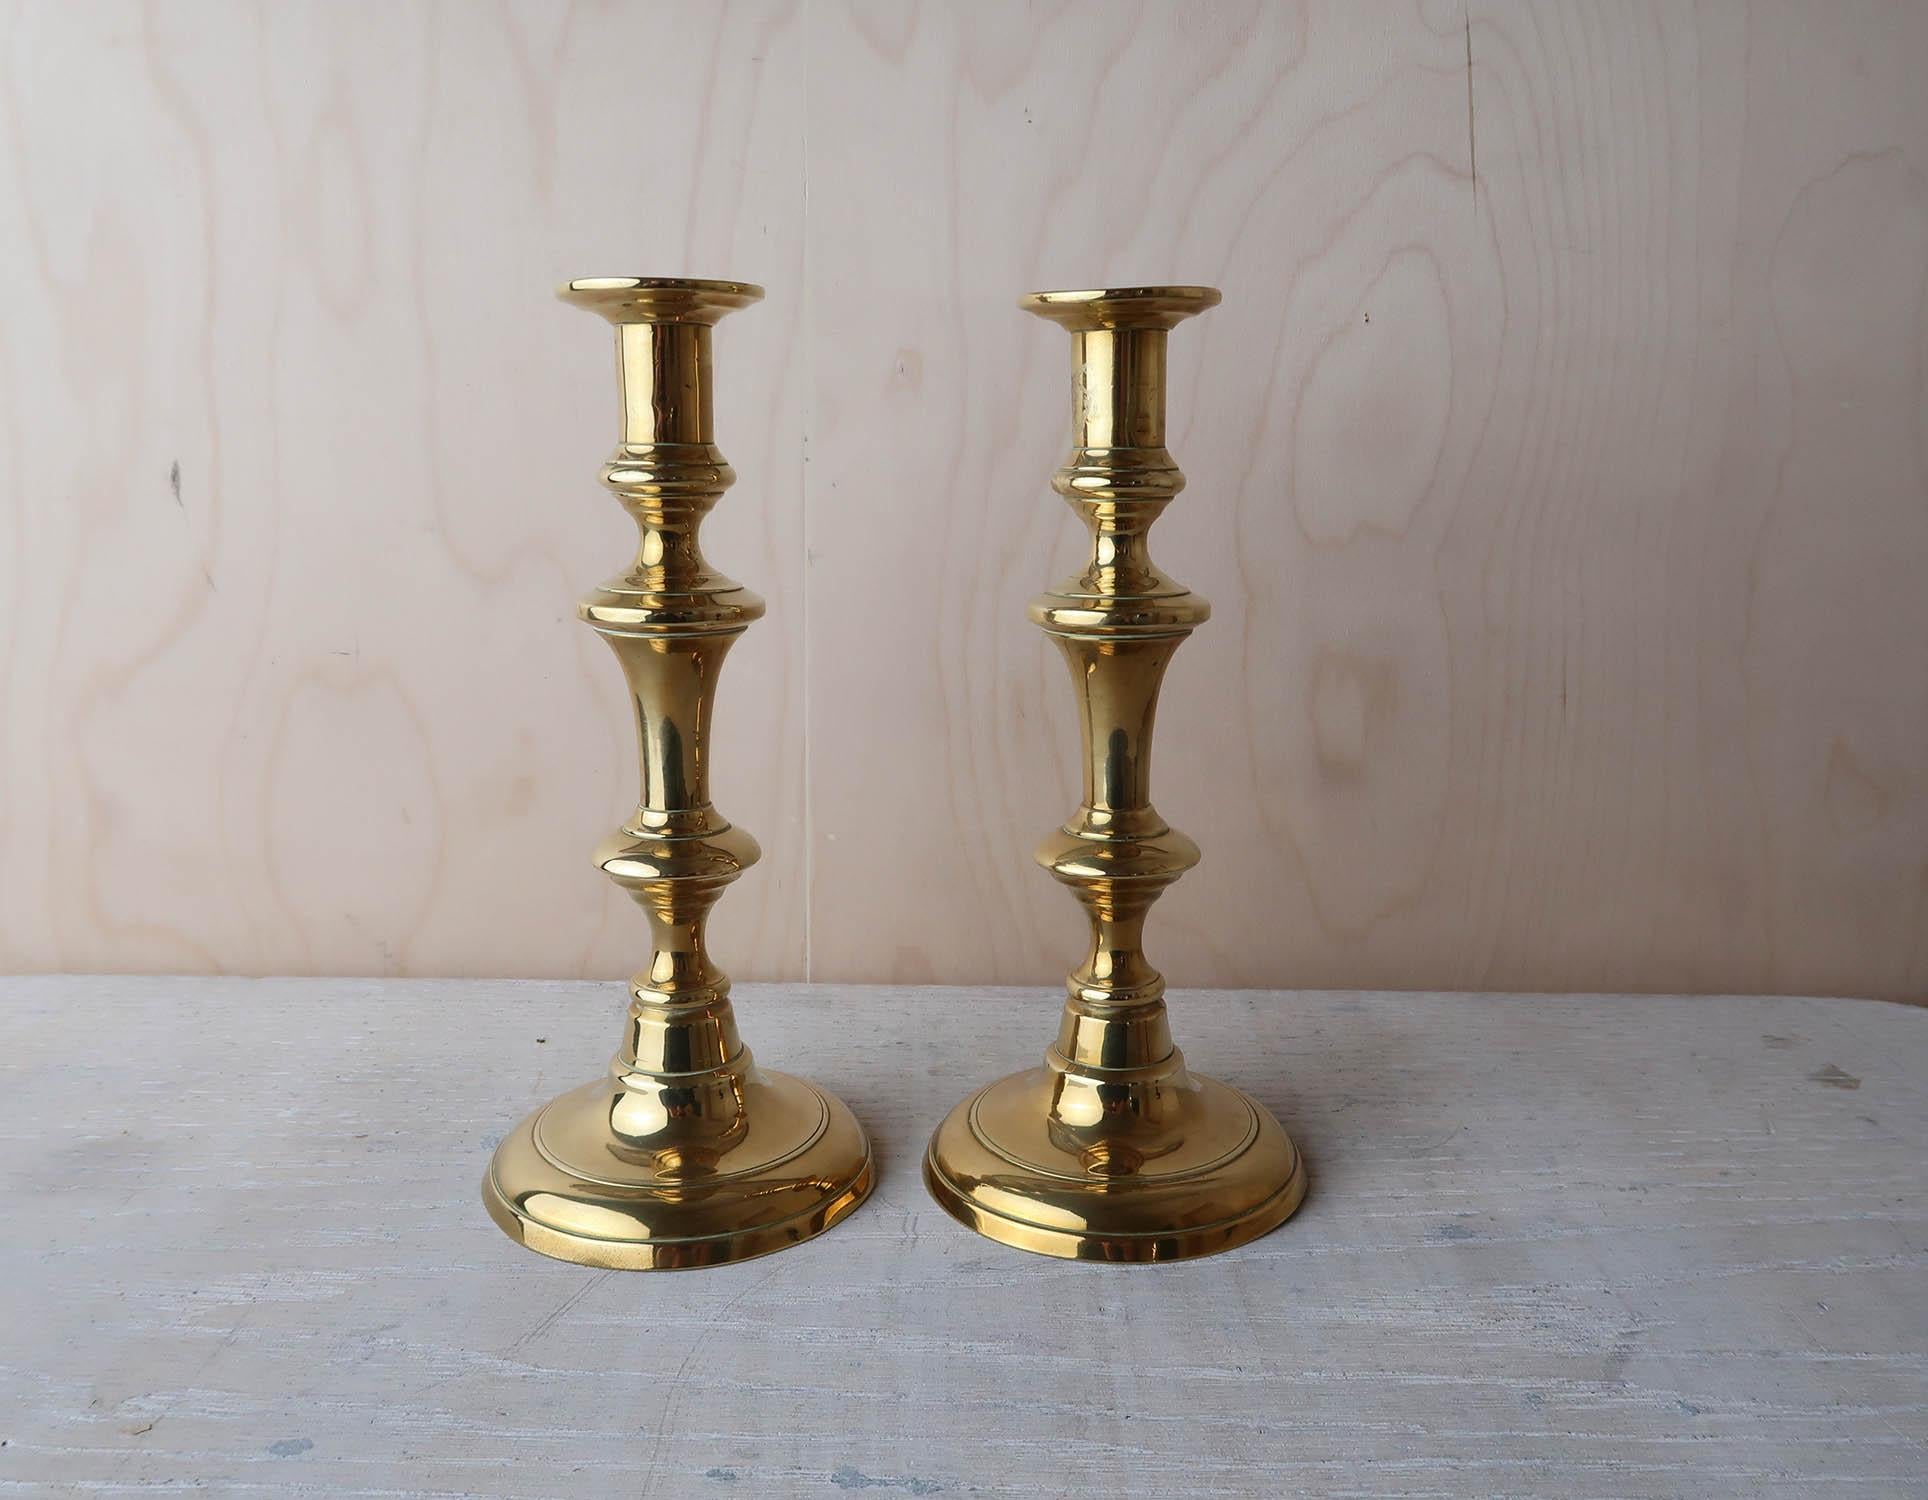 Turned Pair of Antique Round Base Brass Candlesticks, English, 19th Century